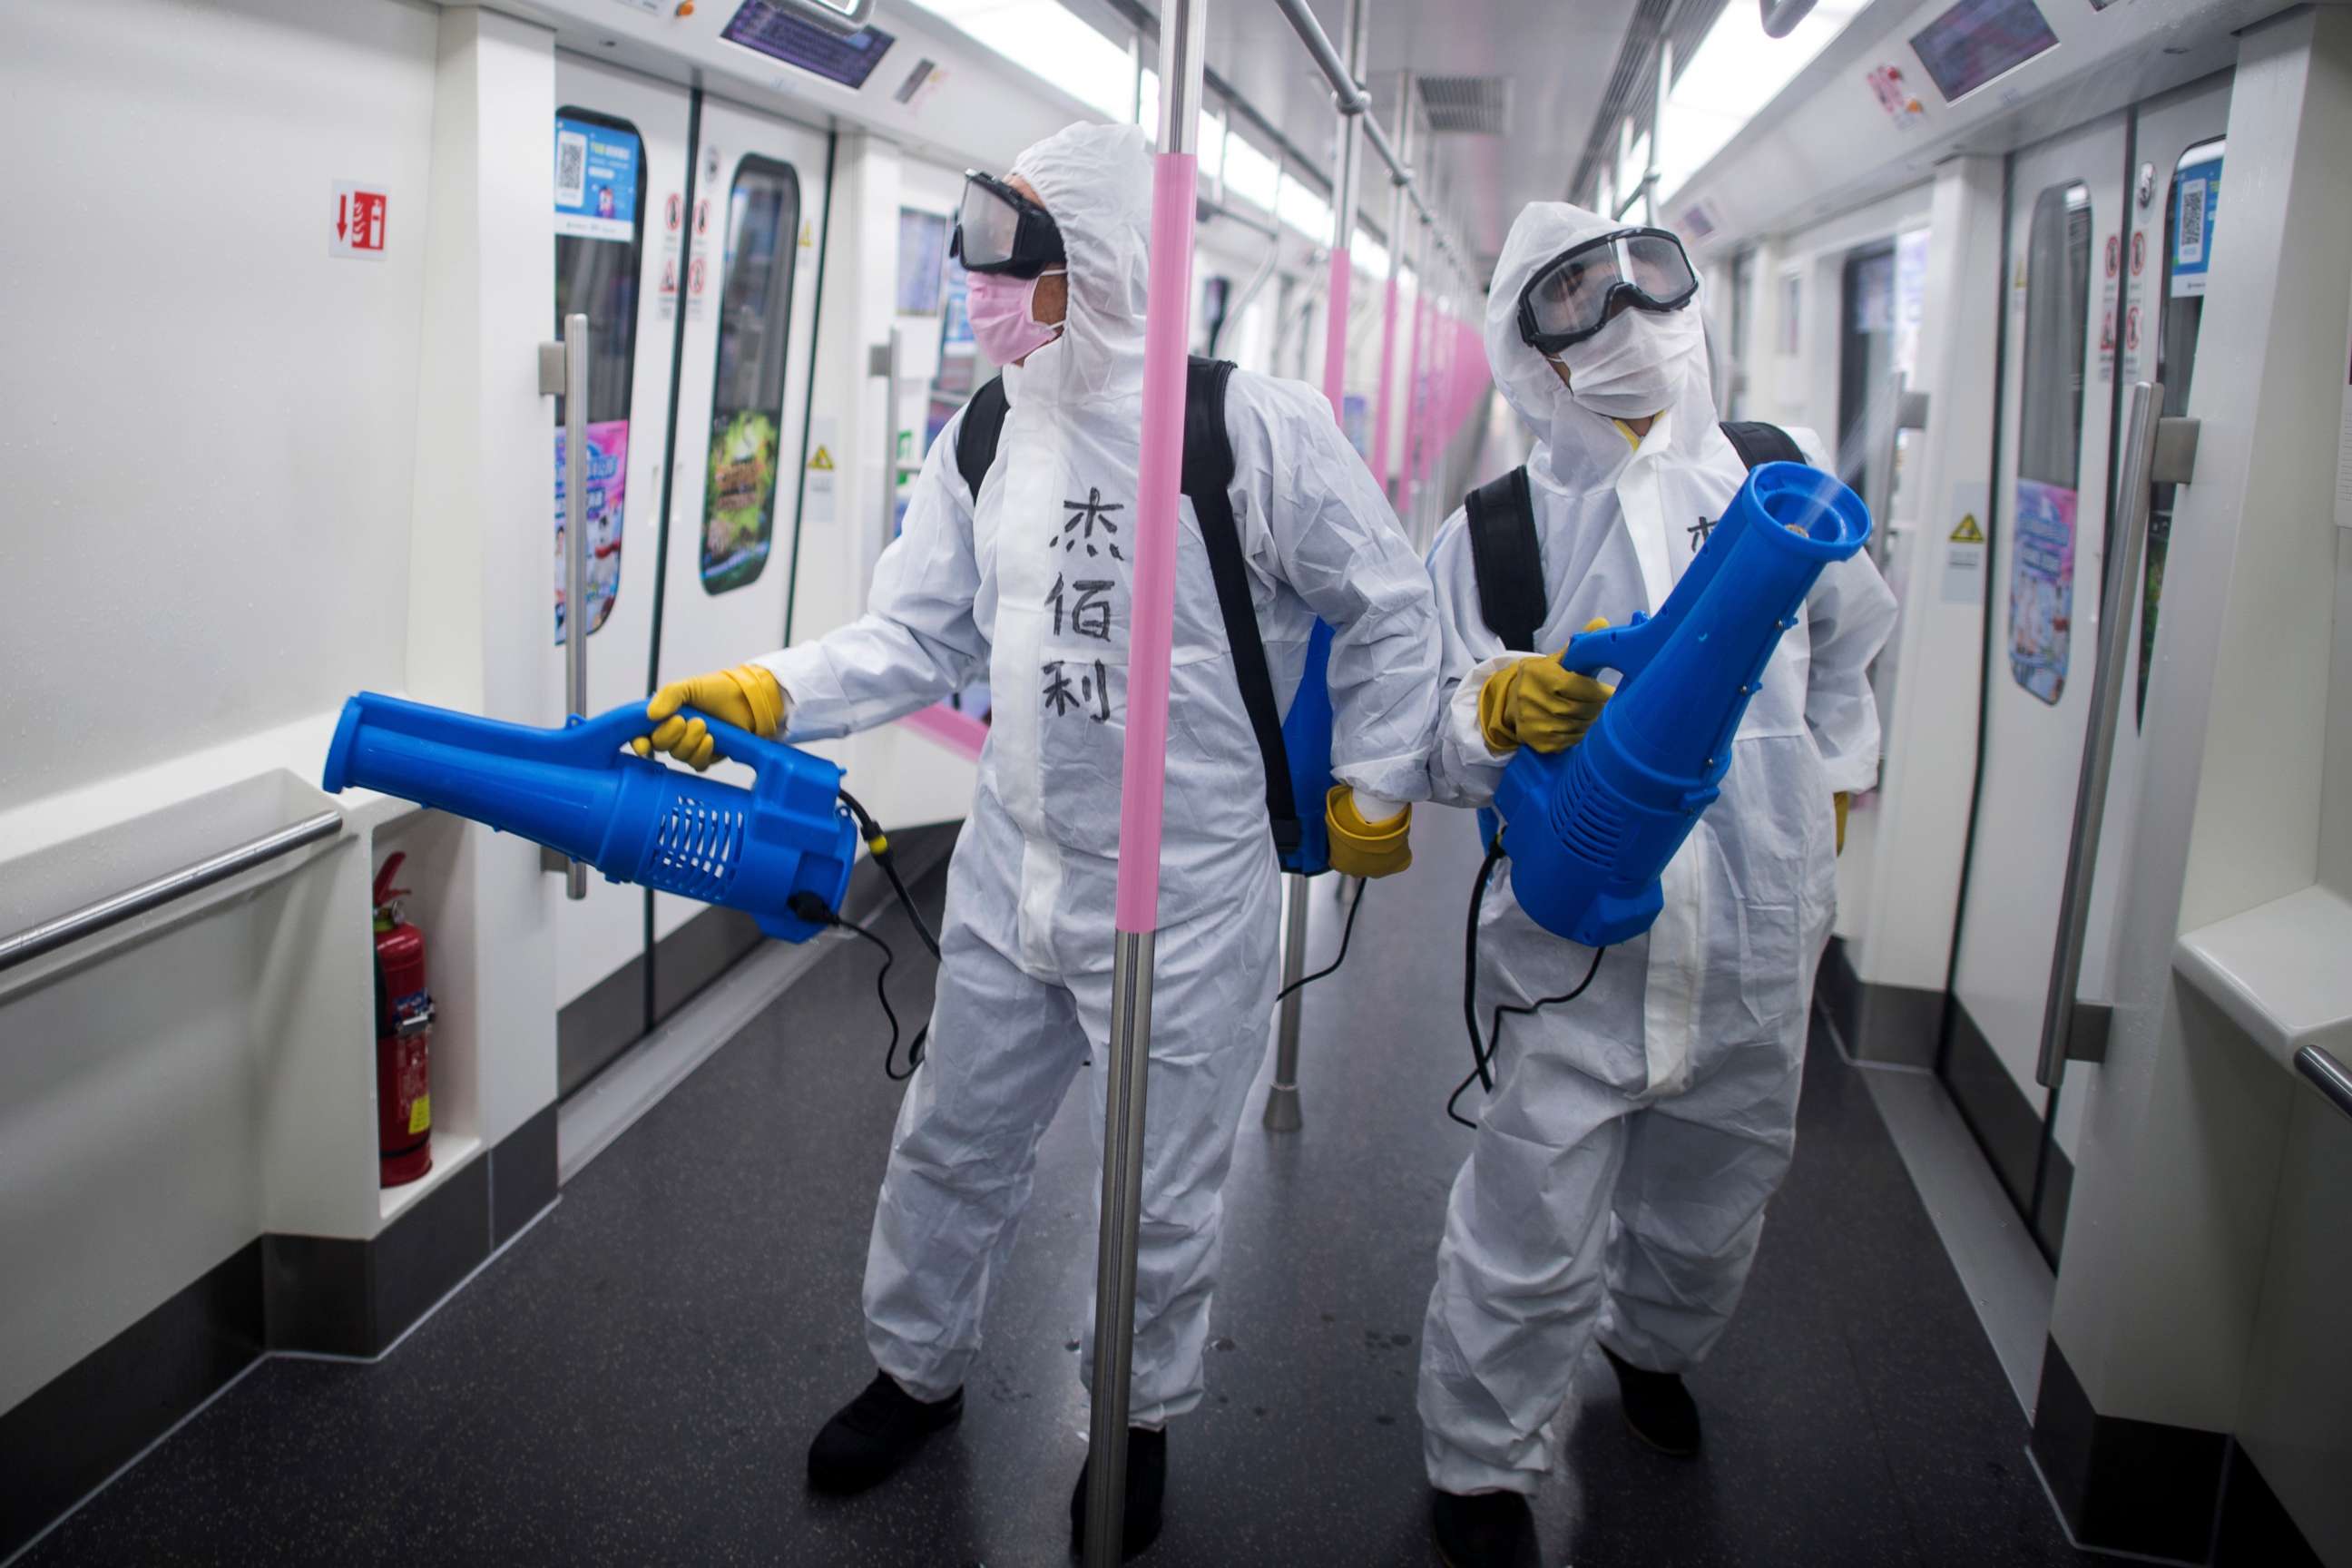 PHOTO: In this photo released by Xinhua News Agency on March 23, 2020, workers disinfect a subway train in preparation for the restoration of public transport in the city of Wuhan in China's central Hubei province.